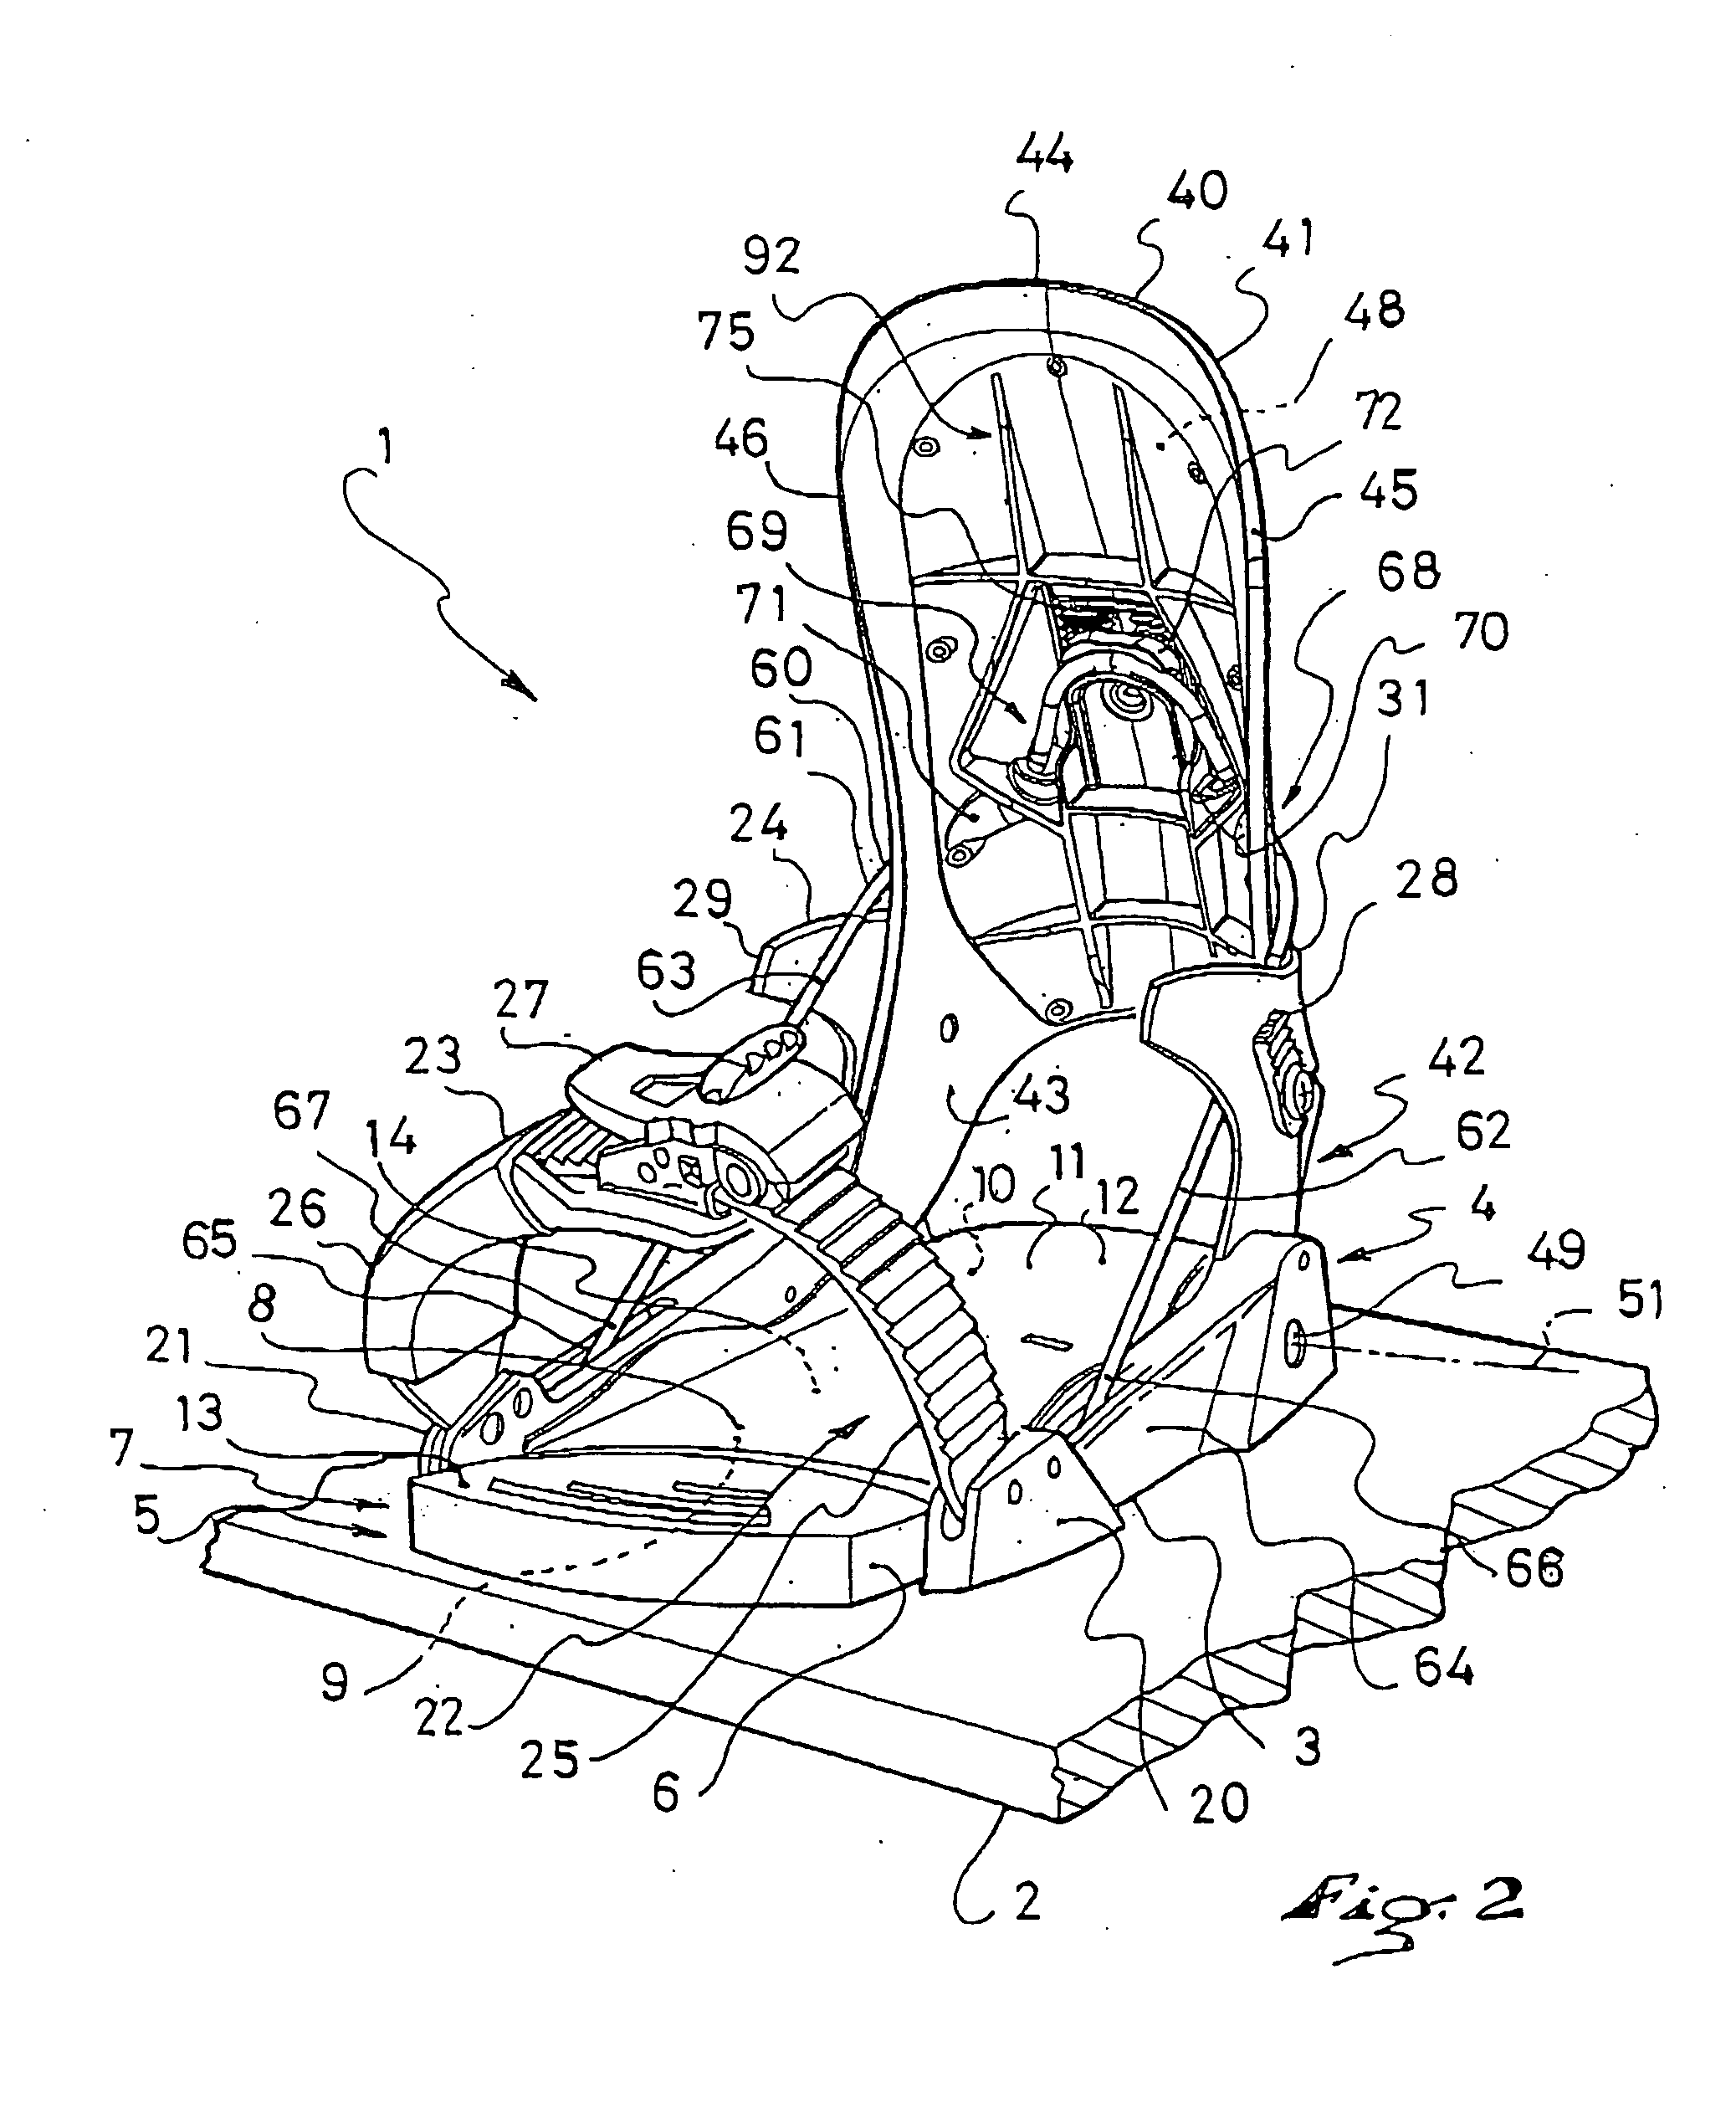 Device for retaining a foot or a boot on a sports apparatus